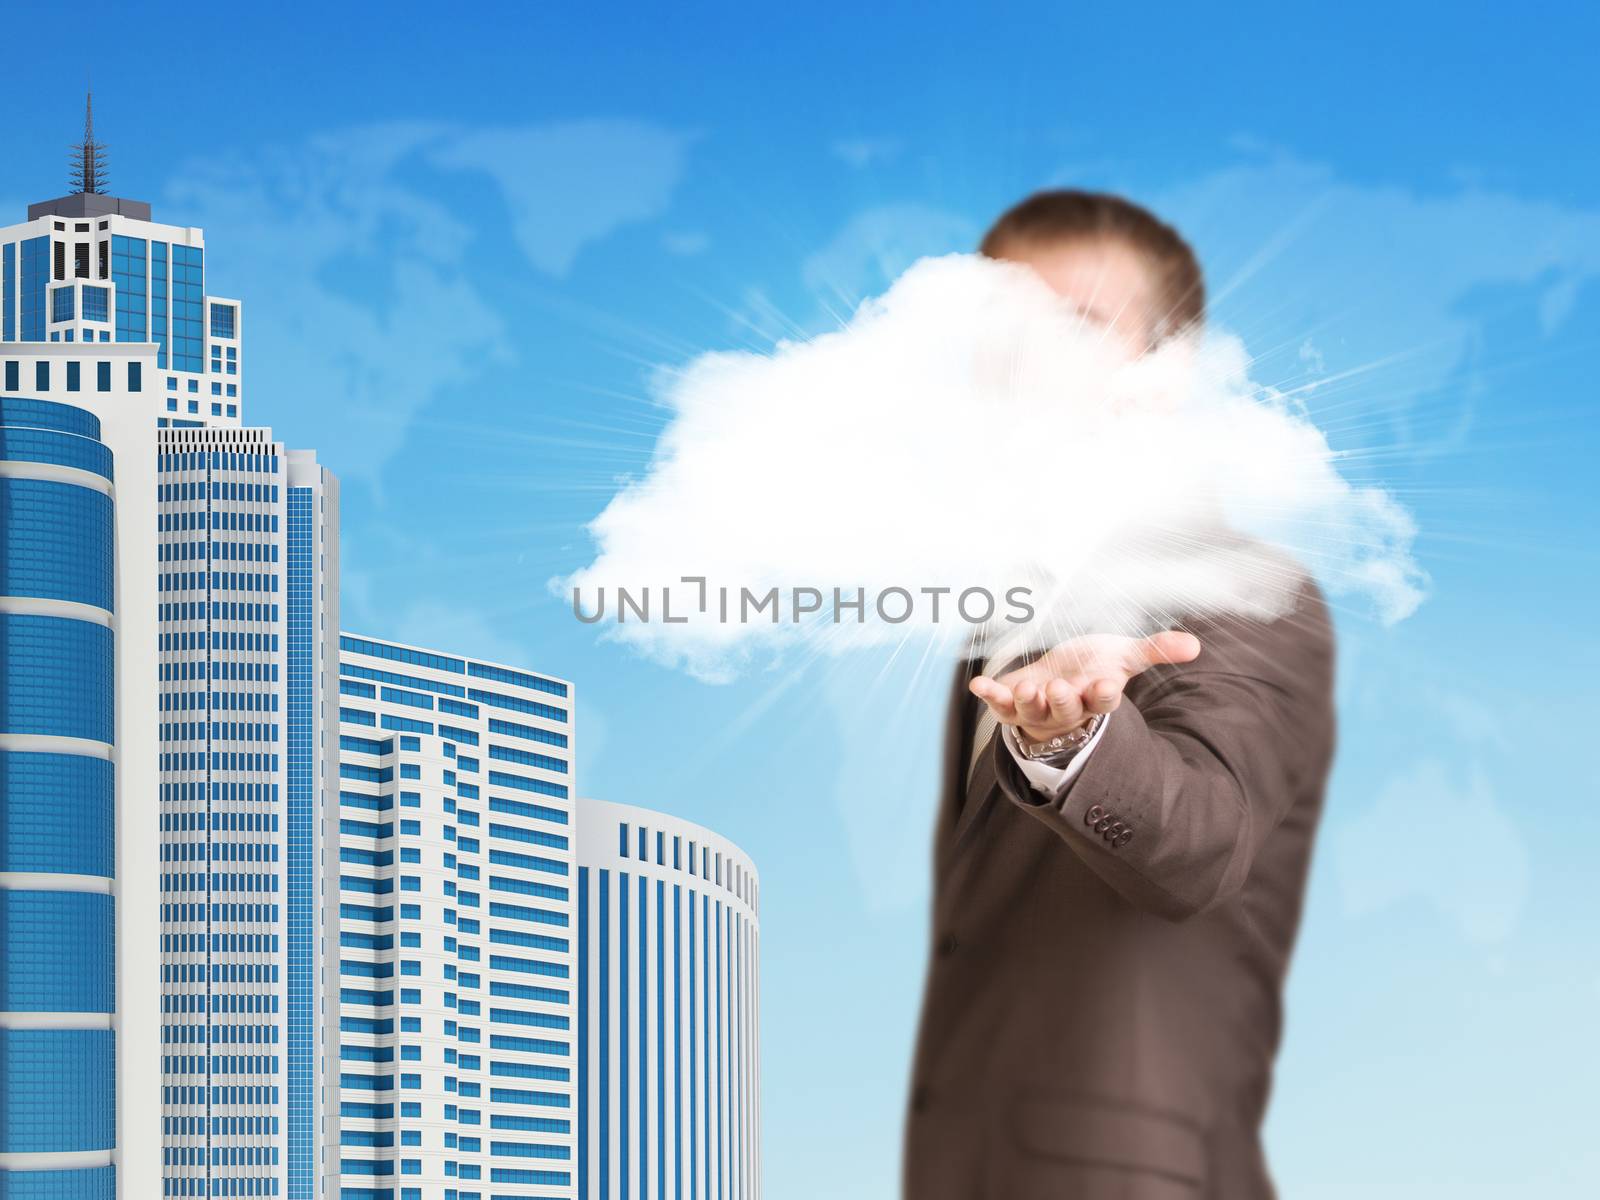 World map, skyscrapers and cloud. Businessman in suit as backdrop